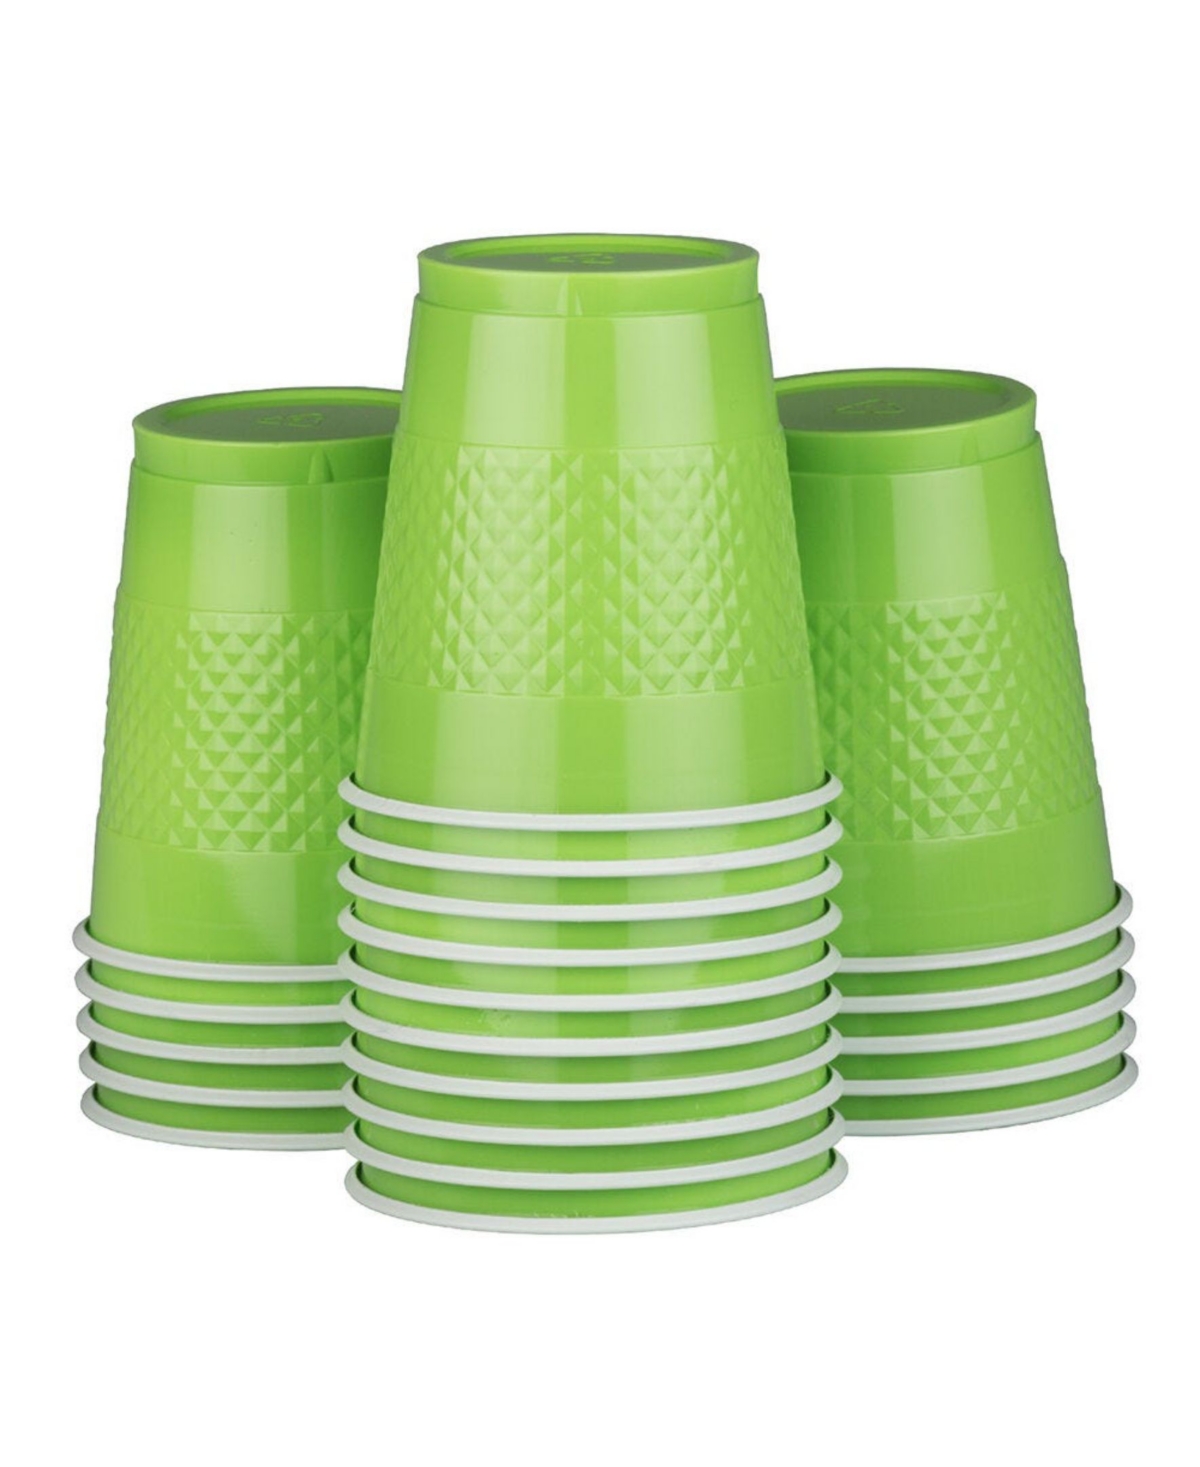 Plastic Party Cups - 12 Ounces - 20 Glasses Per Pack - Lime Green